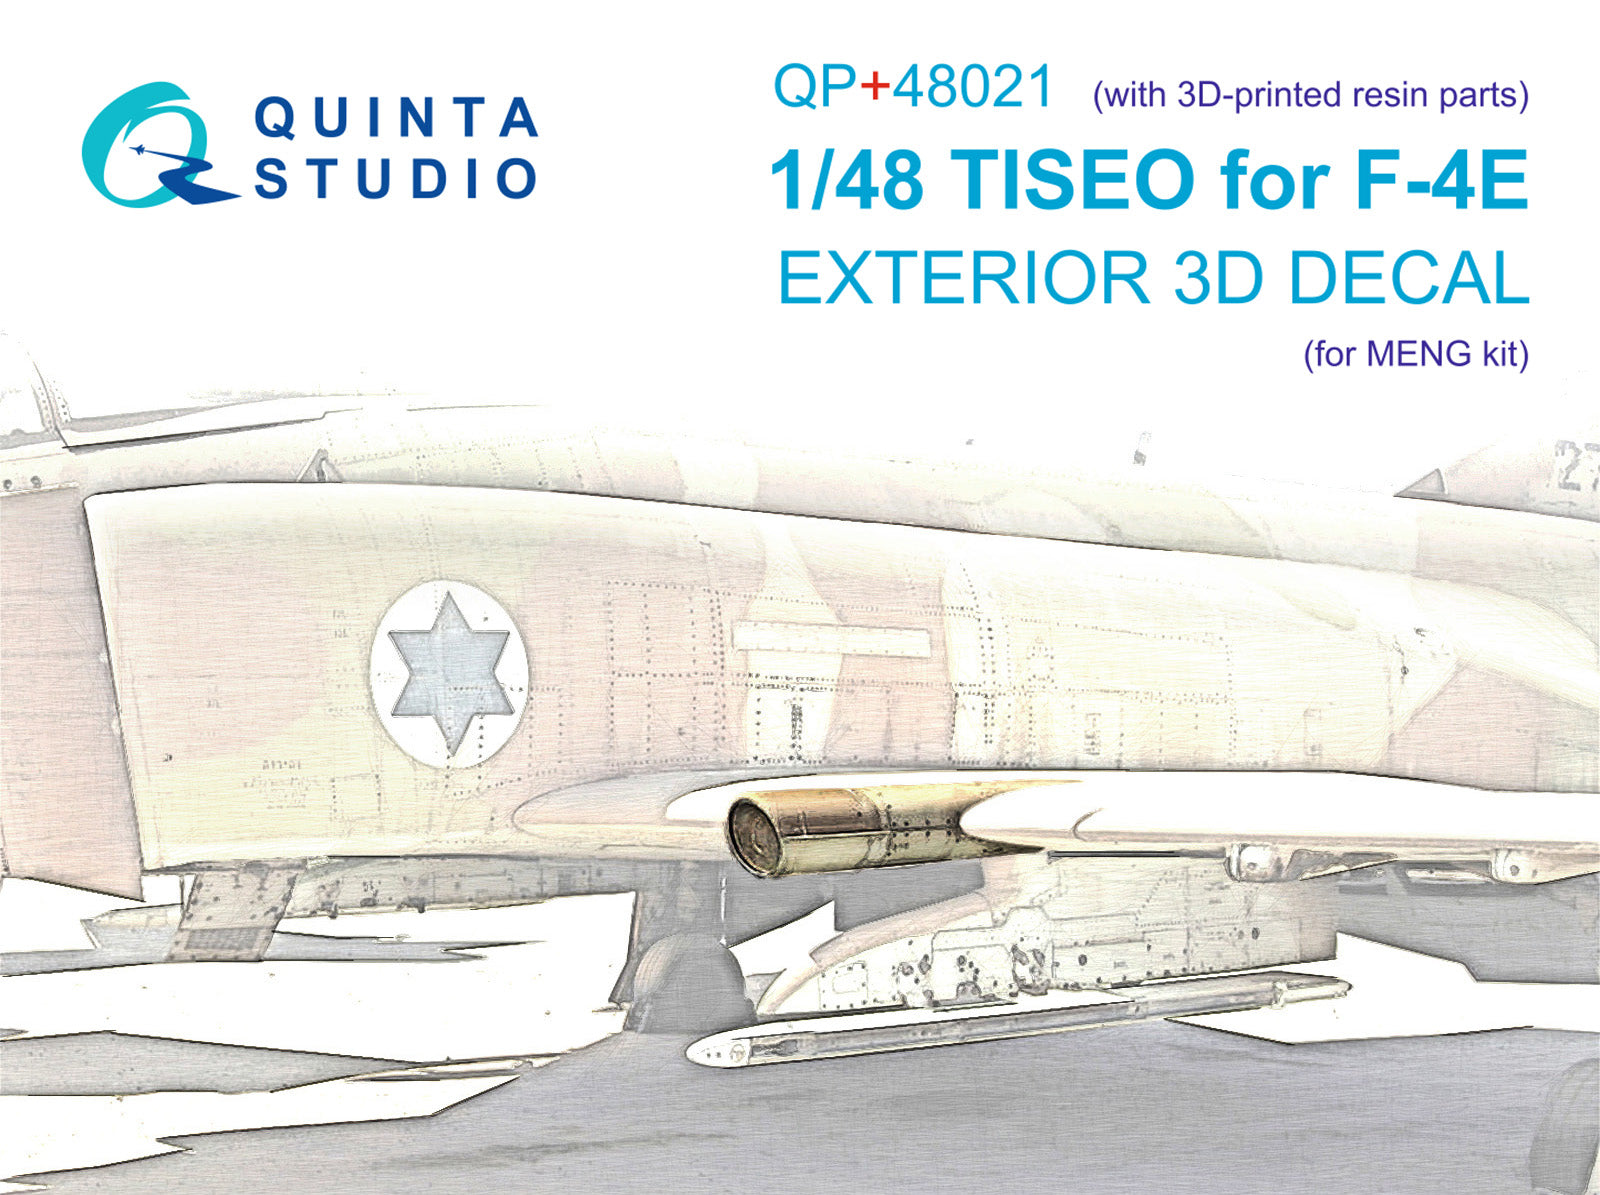 Quinta Studio - 1/48 Tiseo for F-4E - QP+48021 for MENG kits (with 3-D printed resin parts)